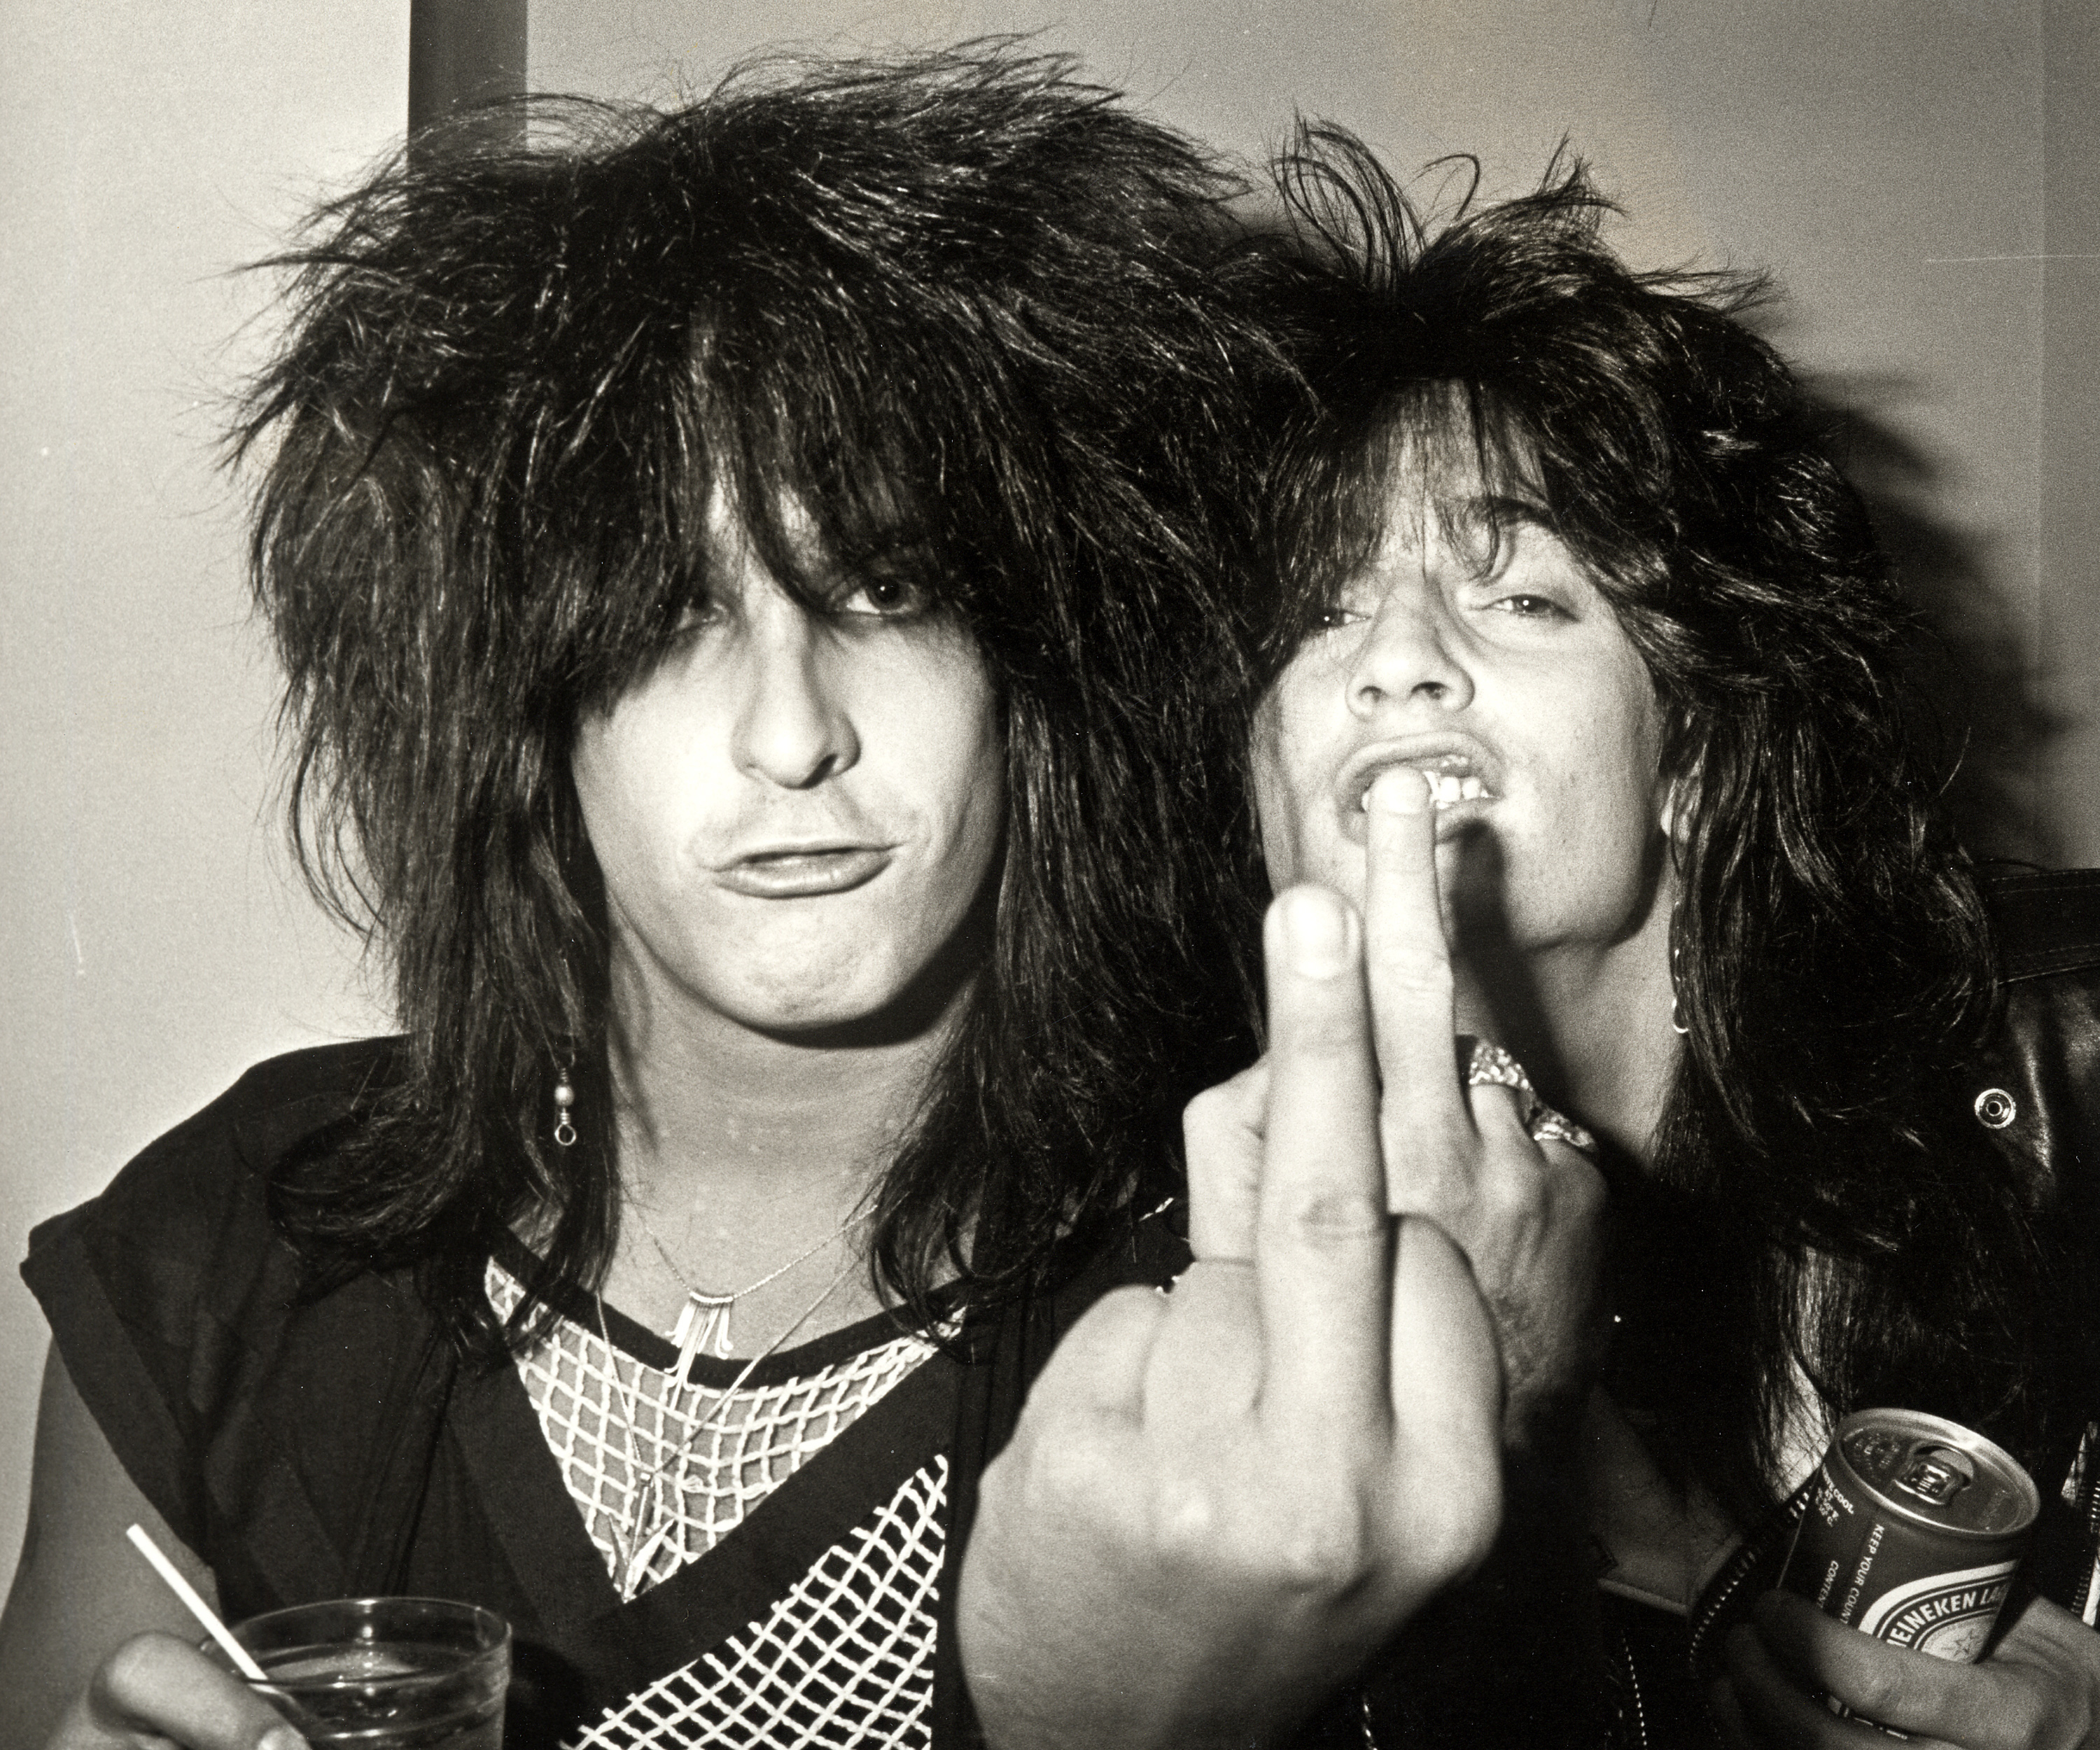 The True(r) Tale of Mötley Crüe: What Netflix's The Dirt Got Wrong - SPIN